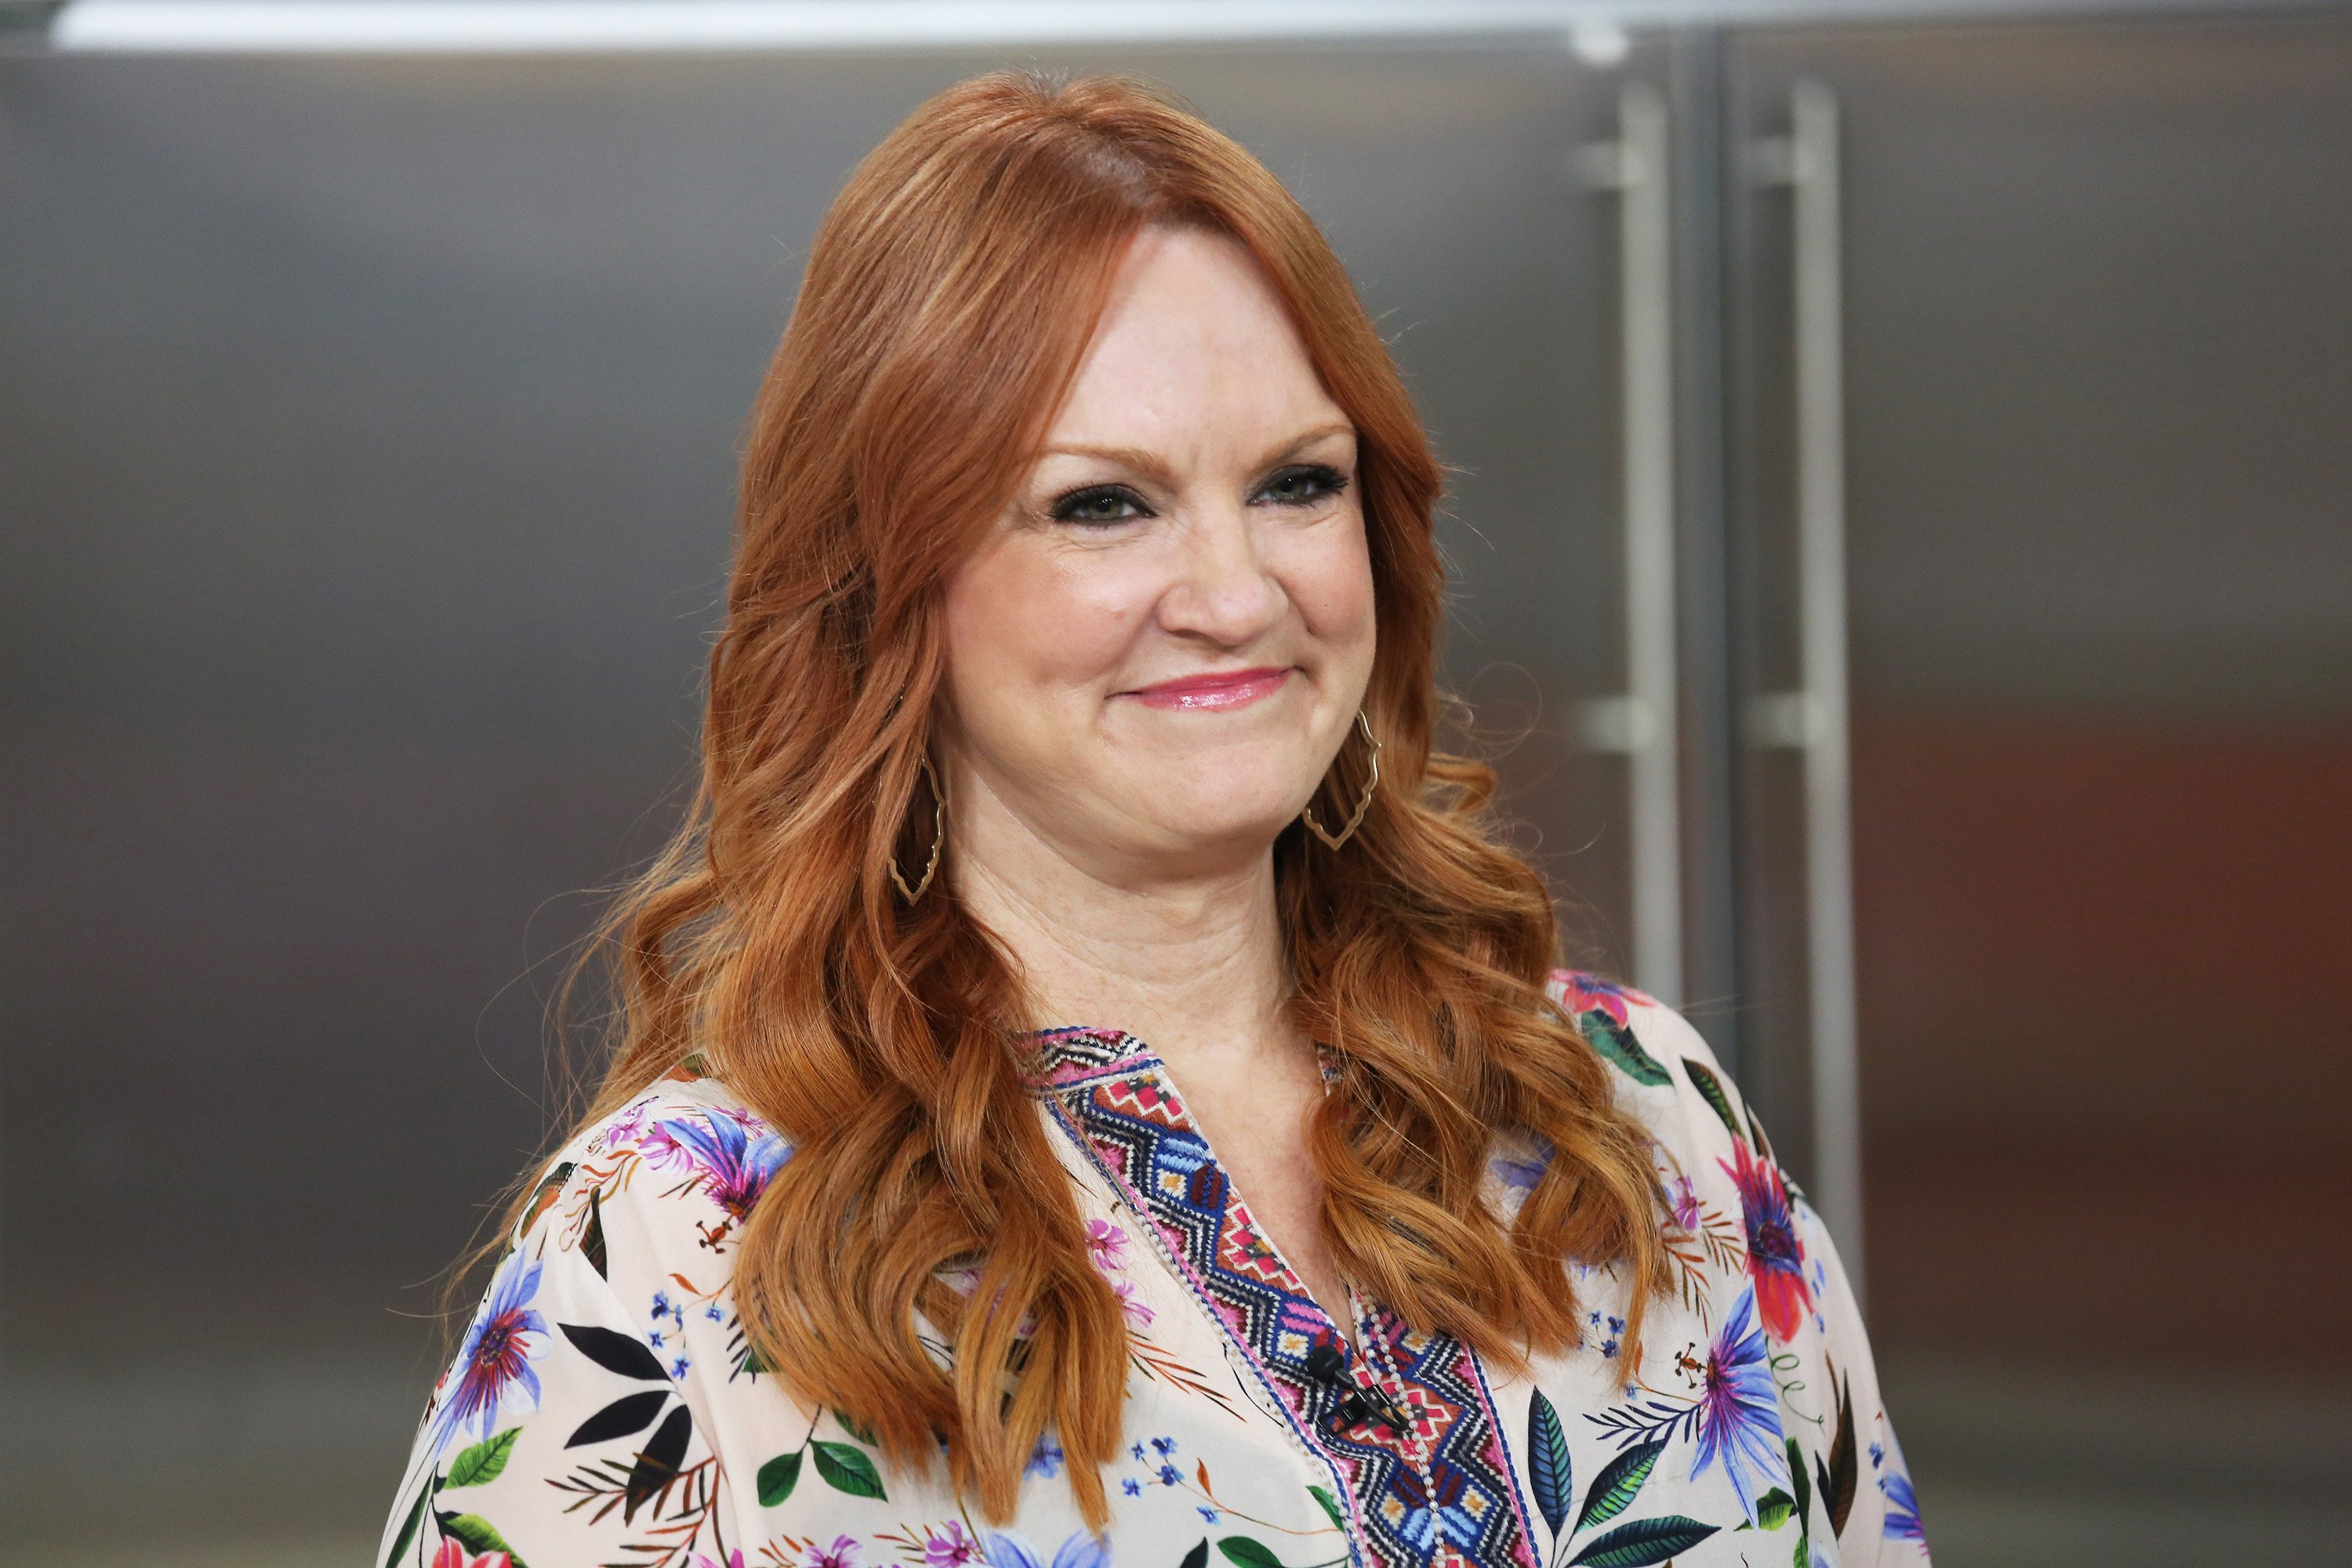 The Pioneer Woman Ree Drummond on the Today show.